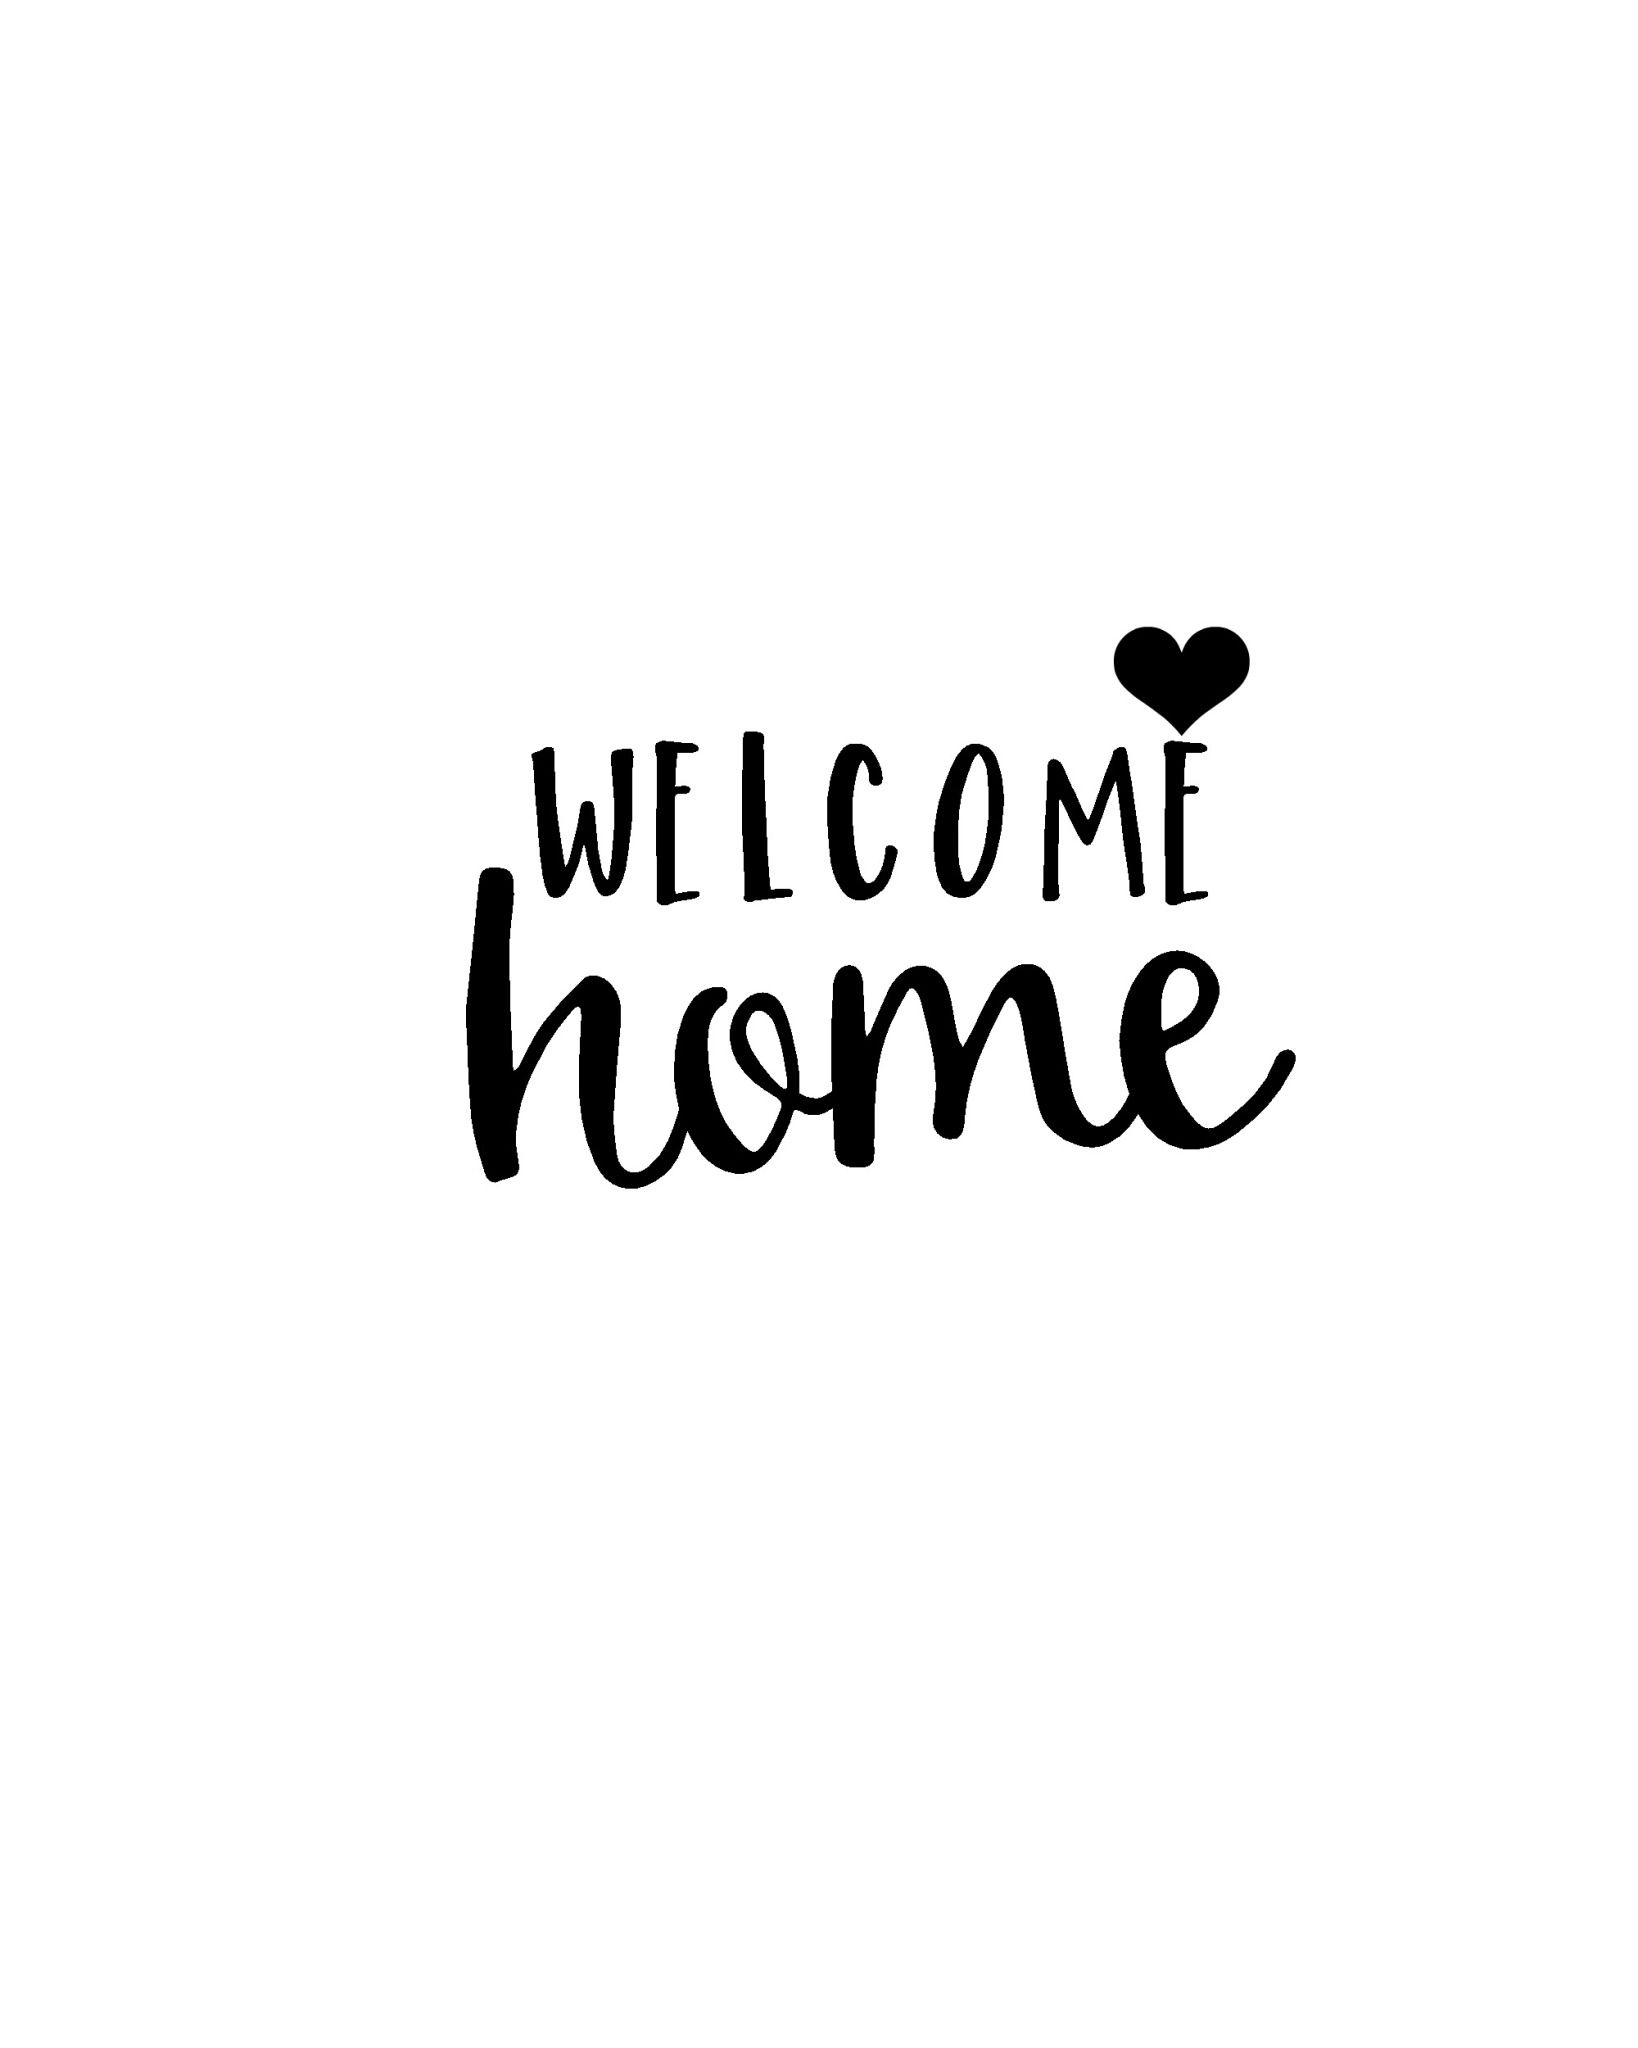 Free Printable Welcome Home Cards Tduck ca Welcome Home Cards Free 